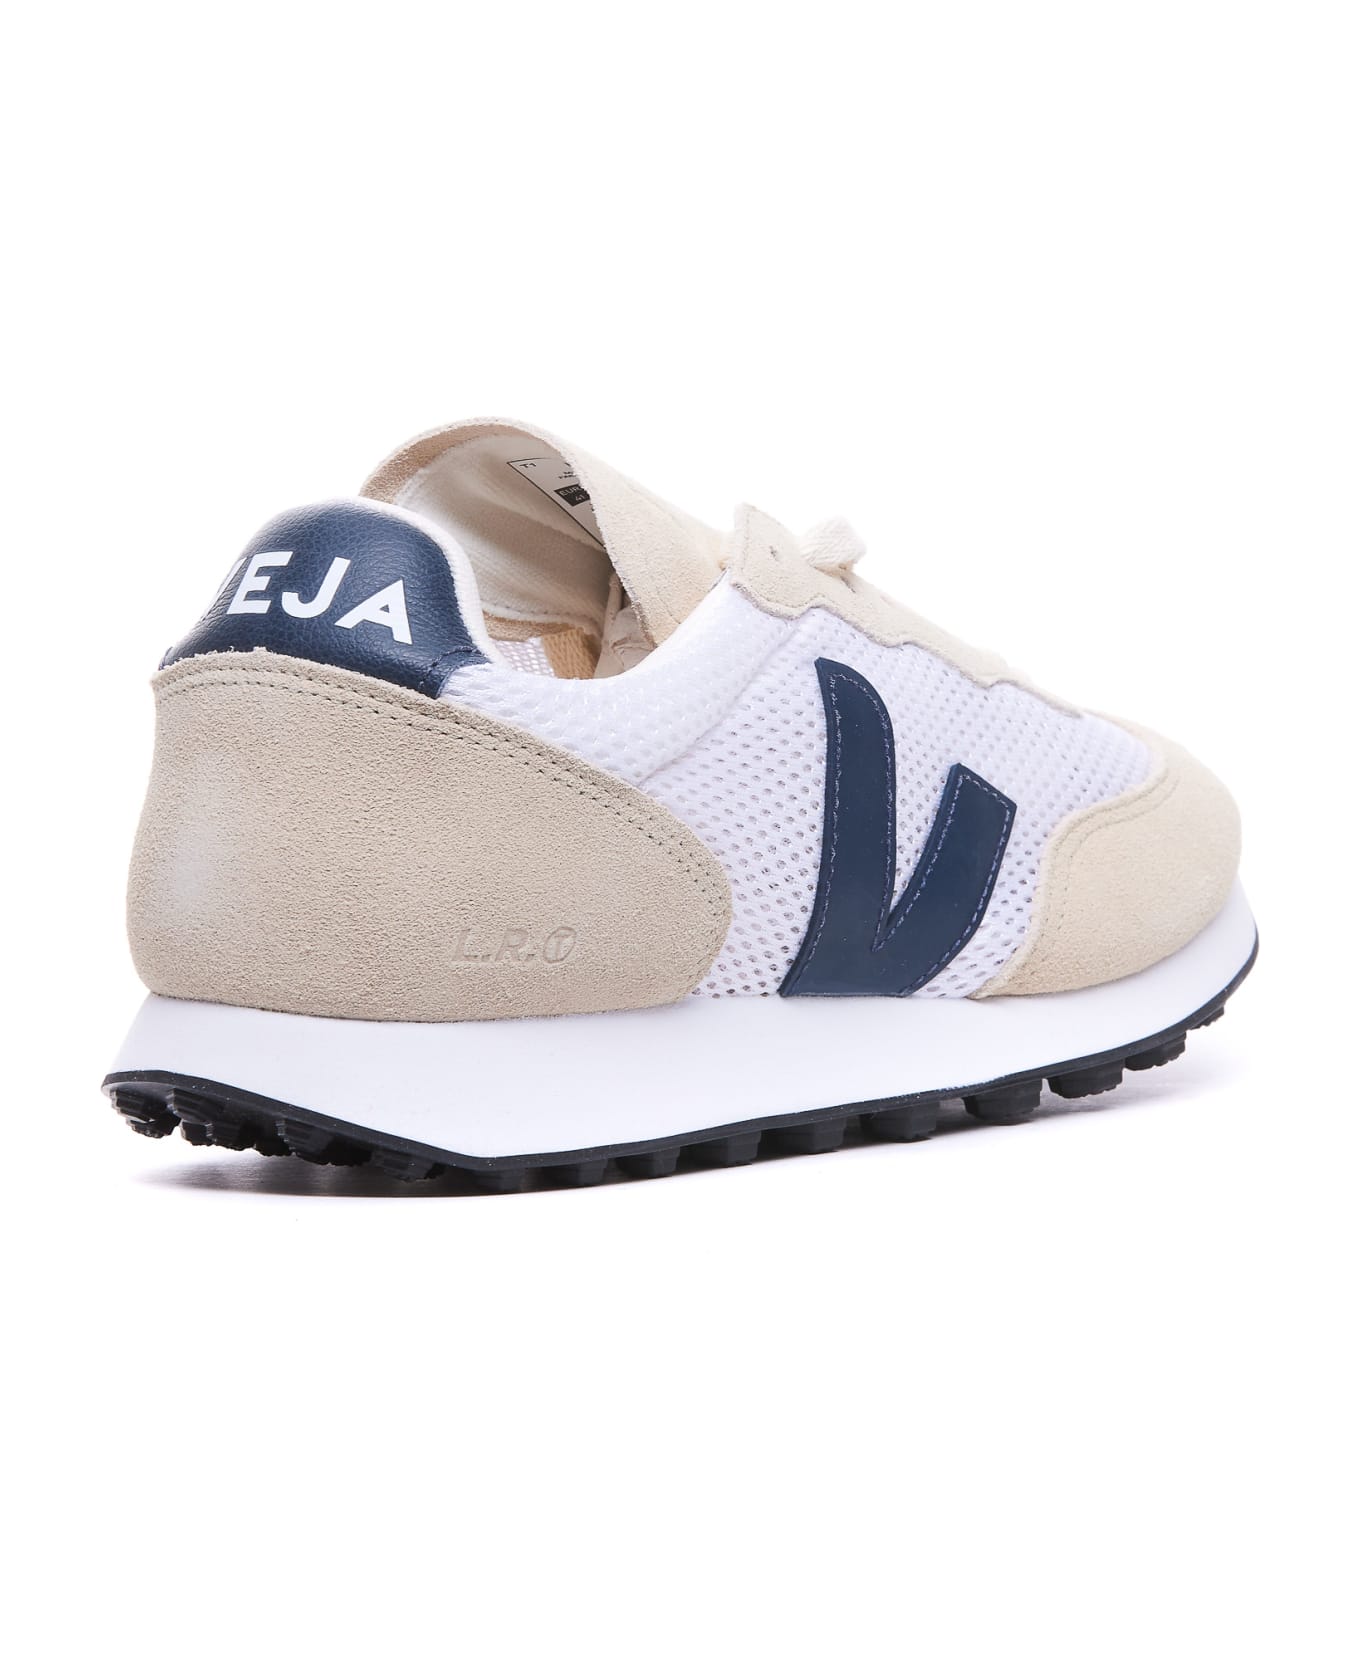 Veja Rio Branco Light Aircell Sneakers - Beige